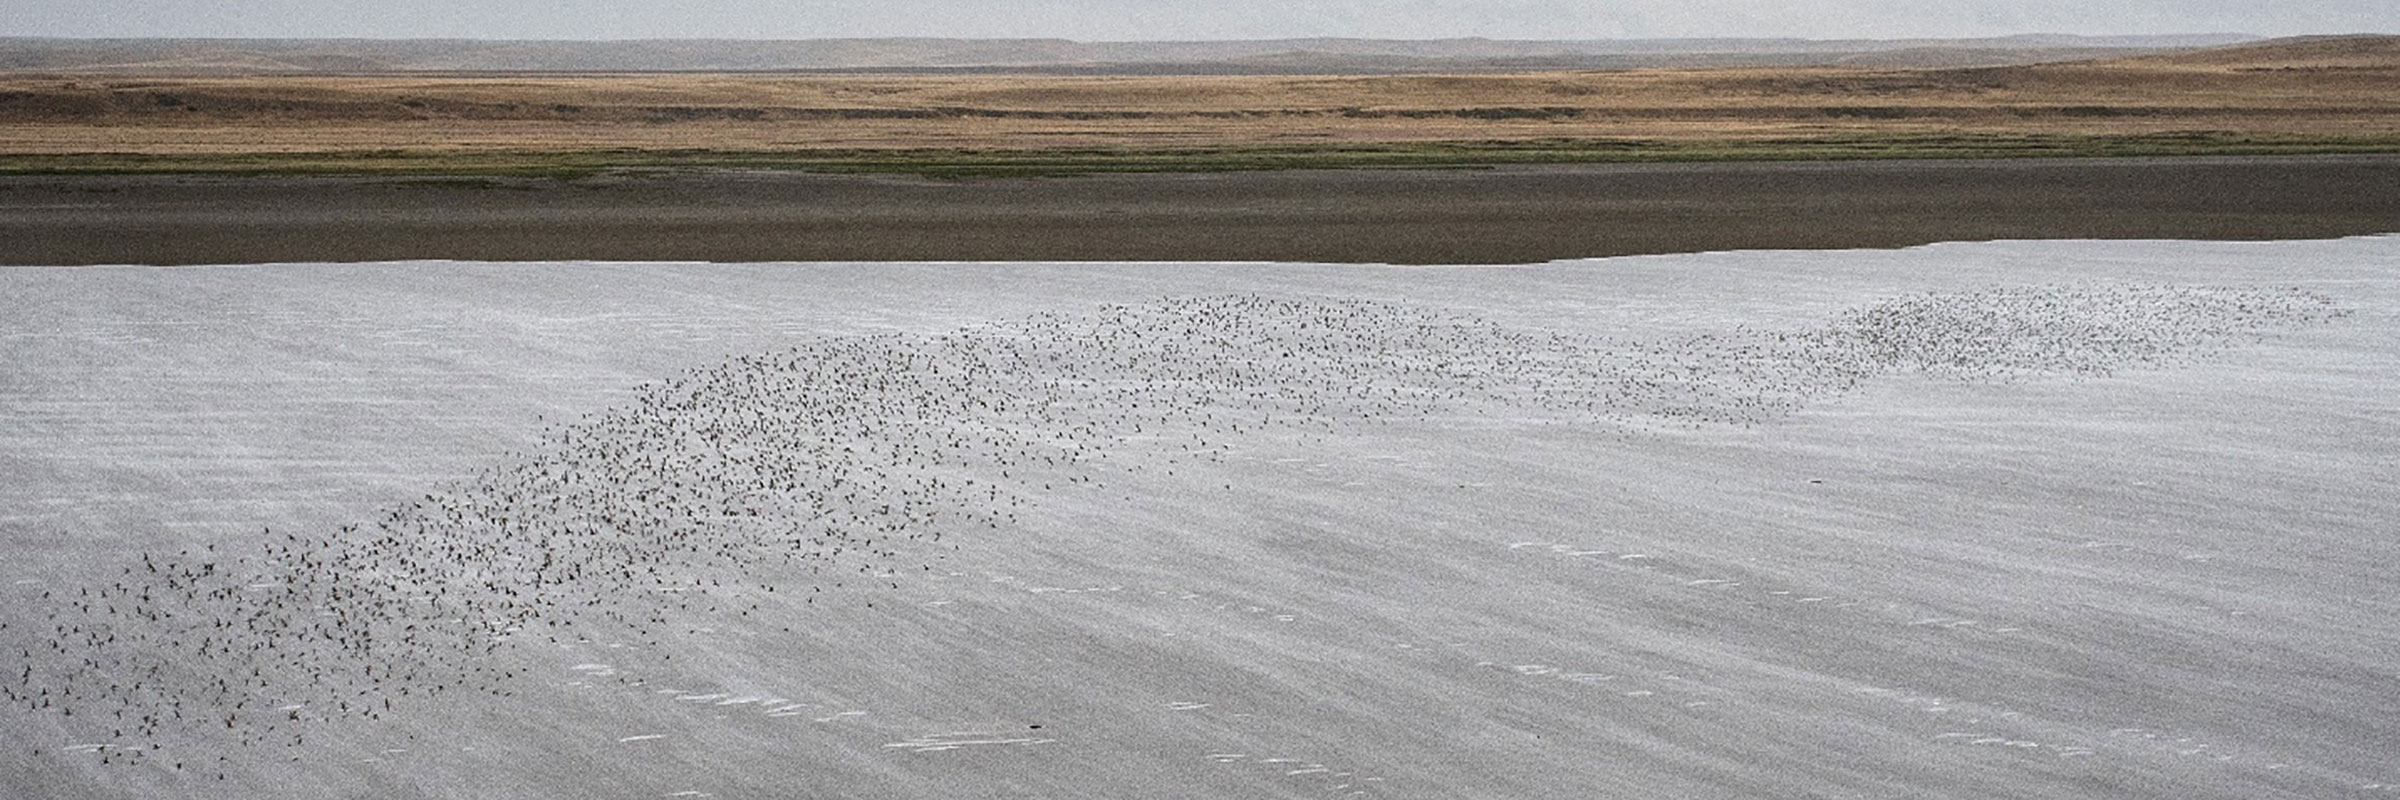 A flock of rufa Red Knots as seen during aerial survey